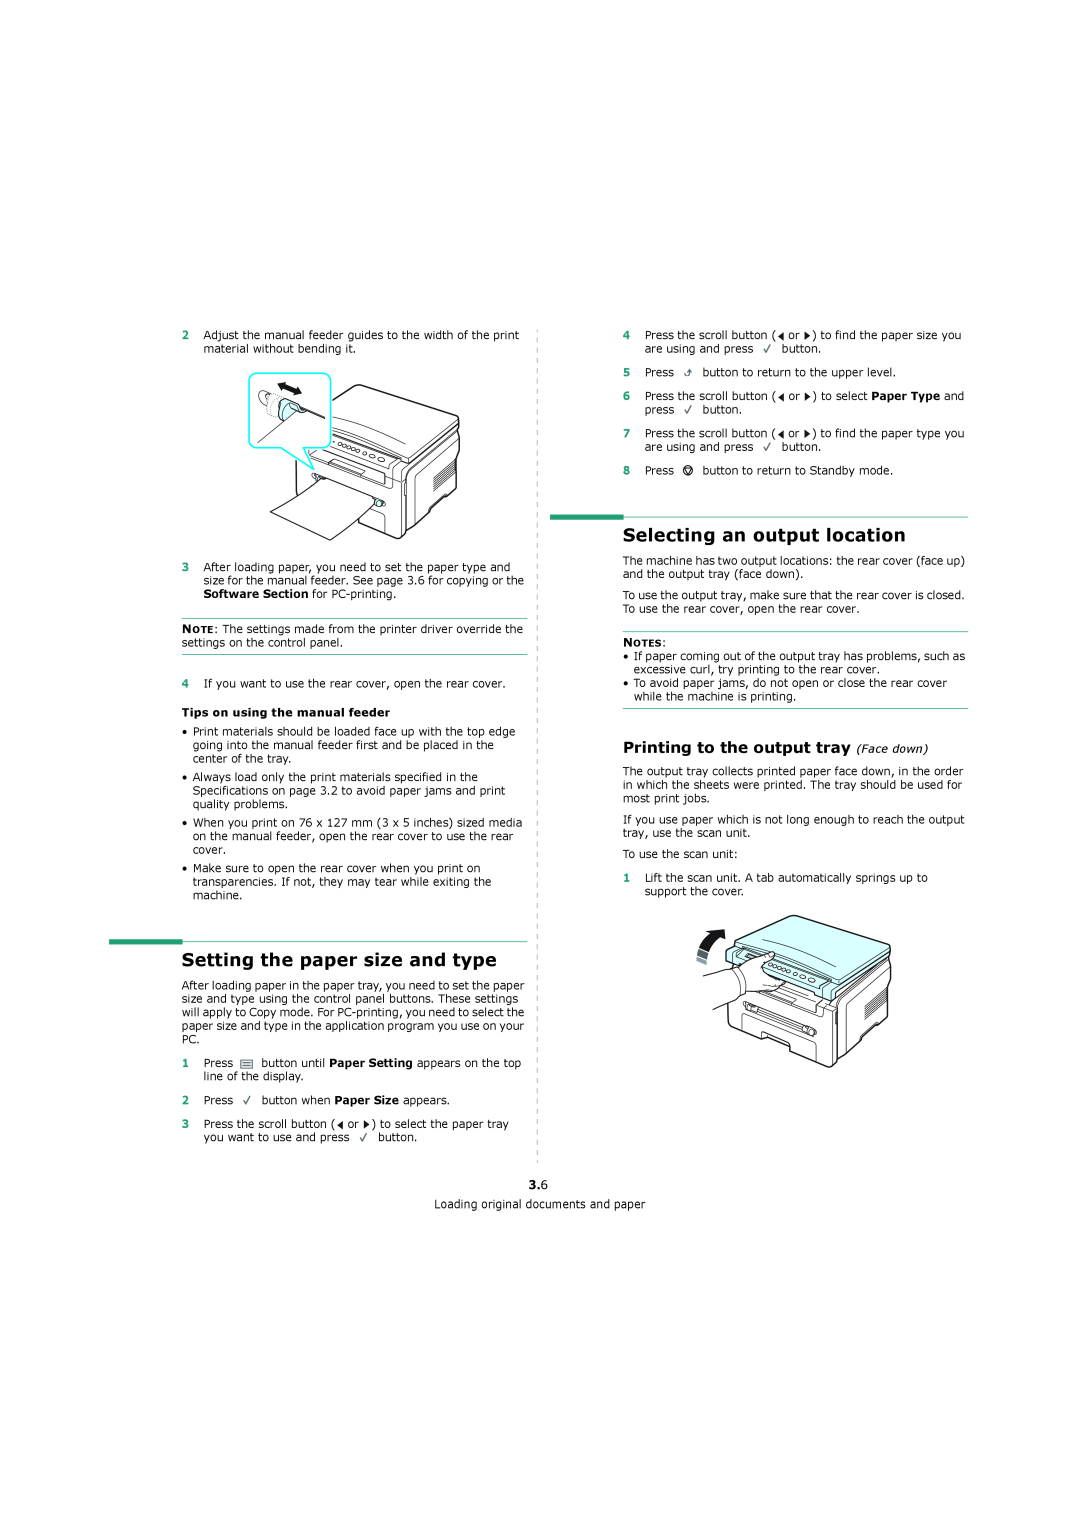 Xerox 3119 manual Selecting an output location, Setting the paper size and type, Printing to the output tray Face down 